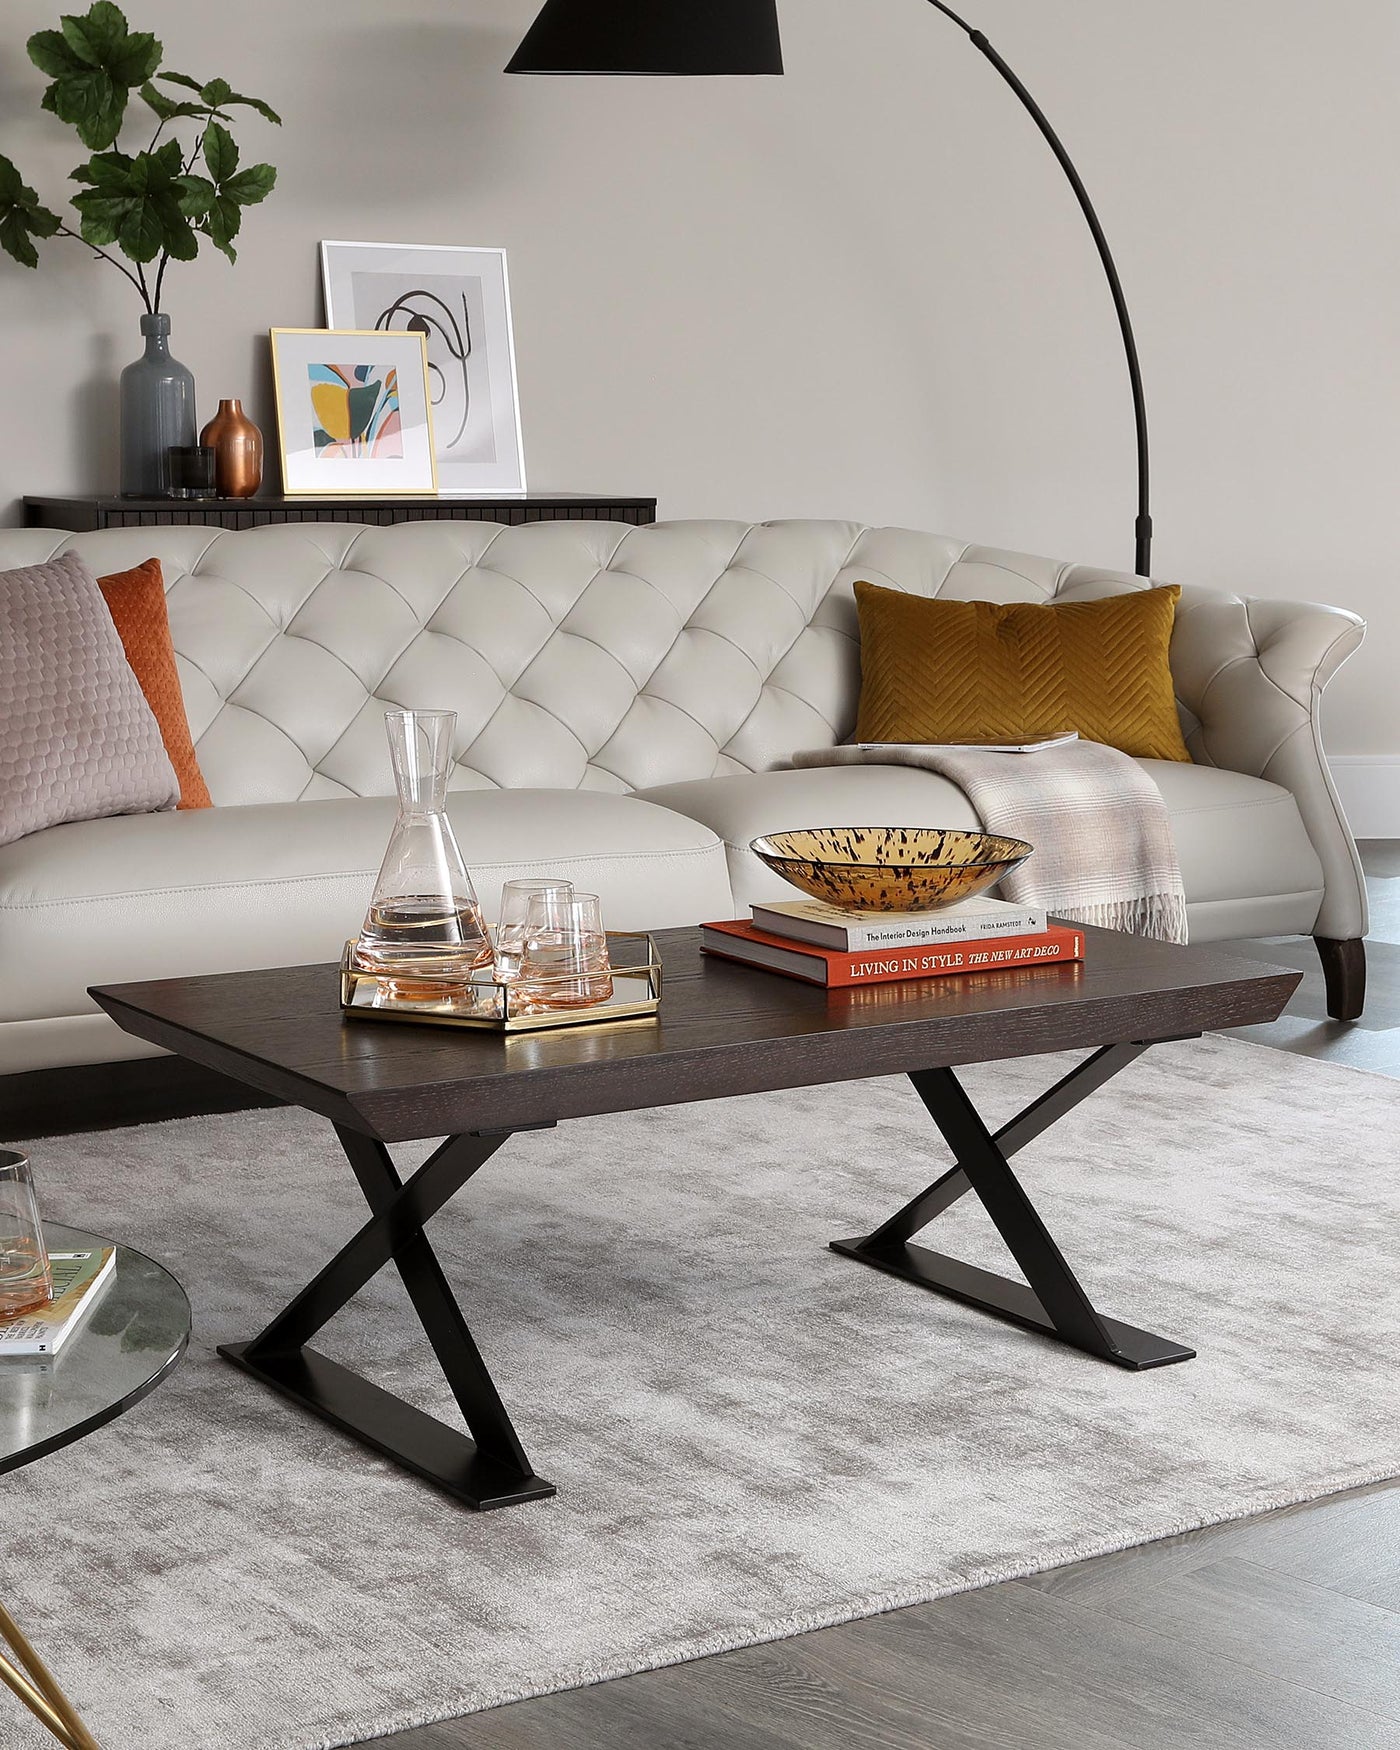 Elegant contemporary living room featuring a tufted cream leather sofa with plush cushions, accompanied by a modern dark wood coffee table with unique X-shaped metal legs, all atop a soft grey area rug.